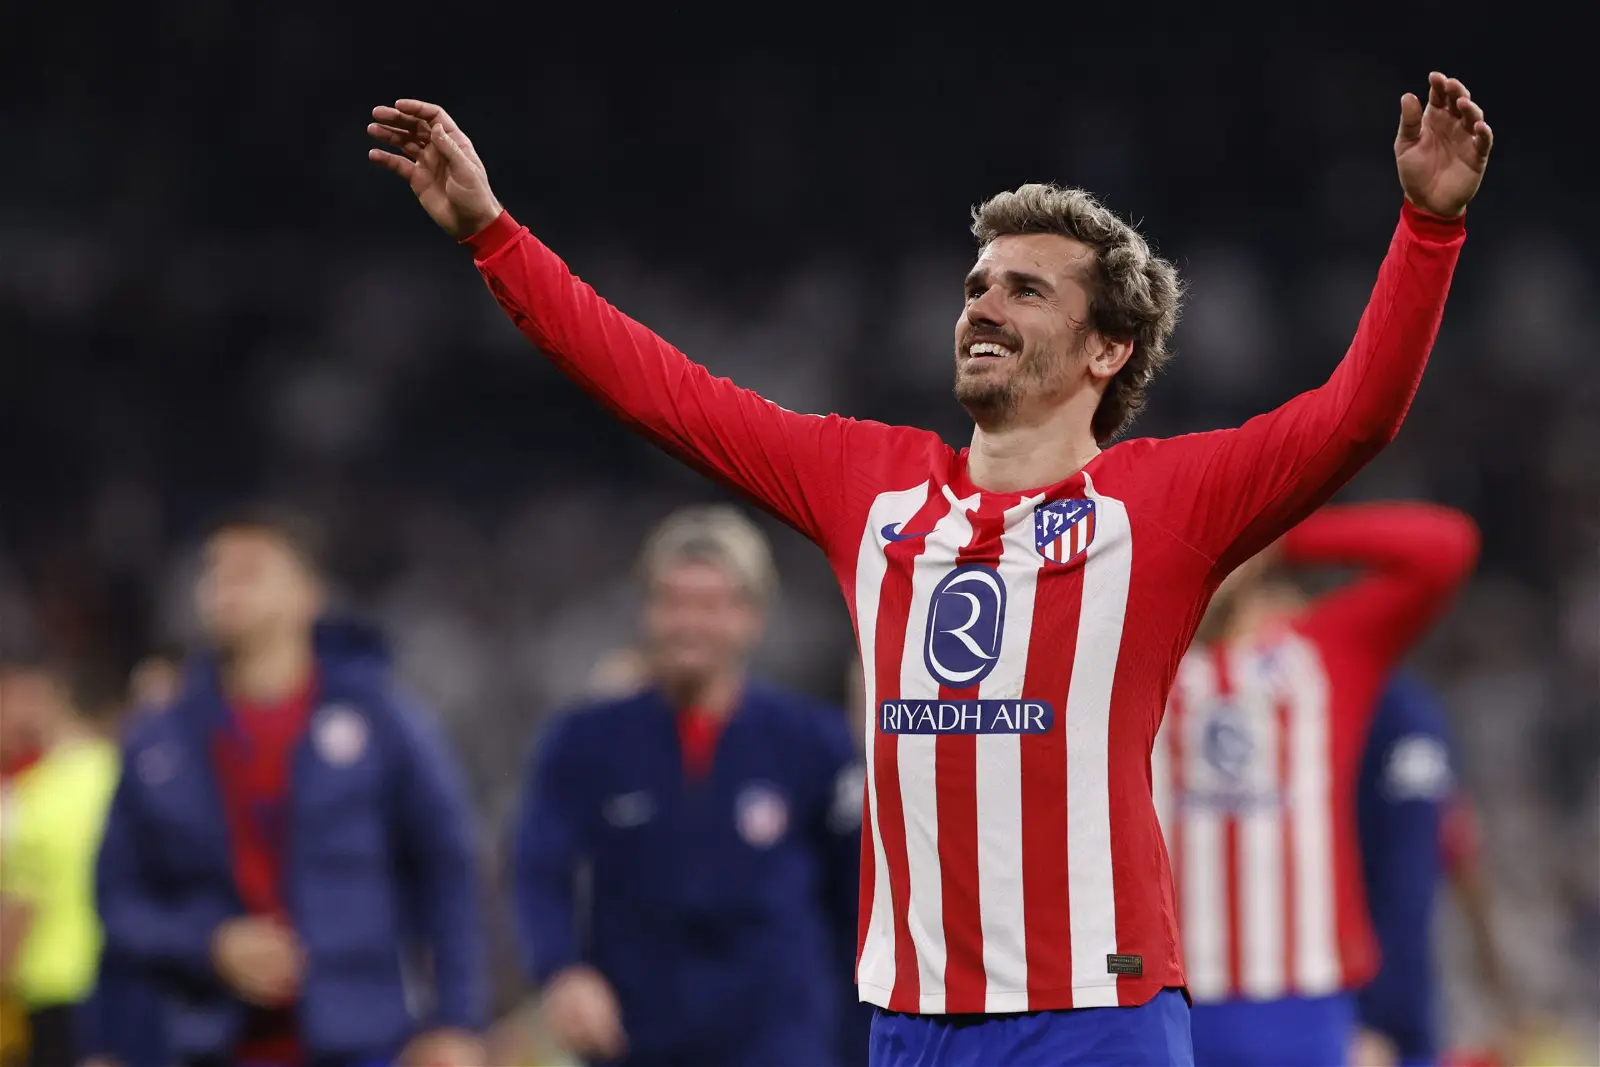 Atletico Madrid's Griezmann in Doubt for Crucial Barcelona Clash: A Look at La Liga's Fierce Rivalry